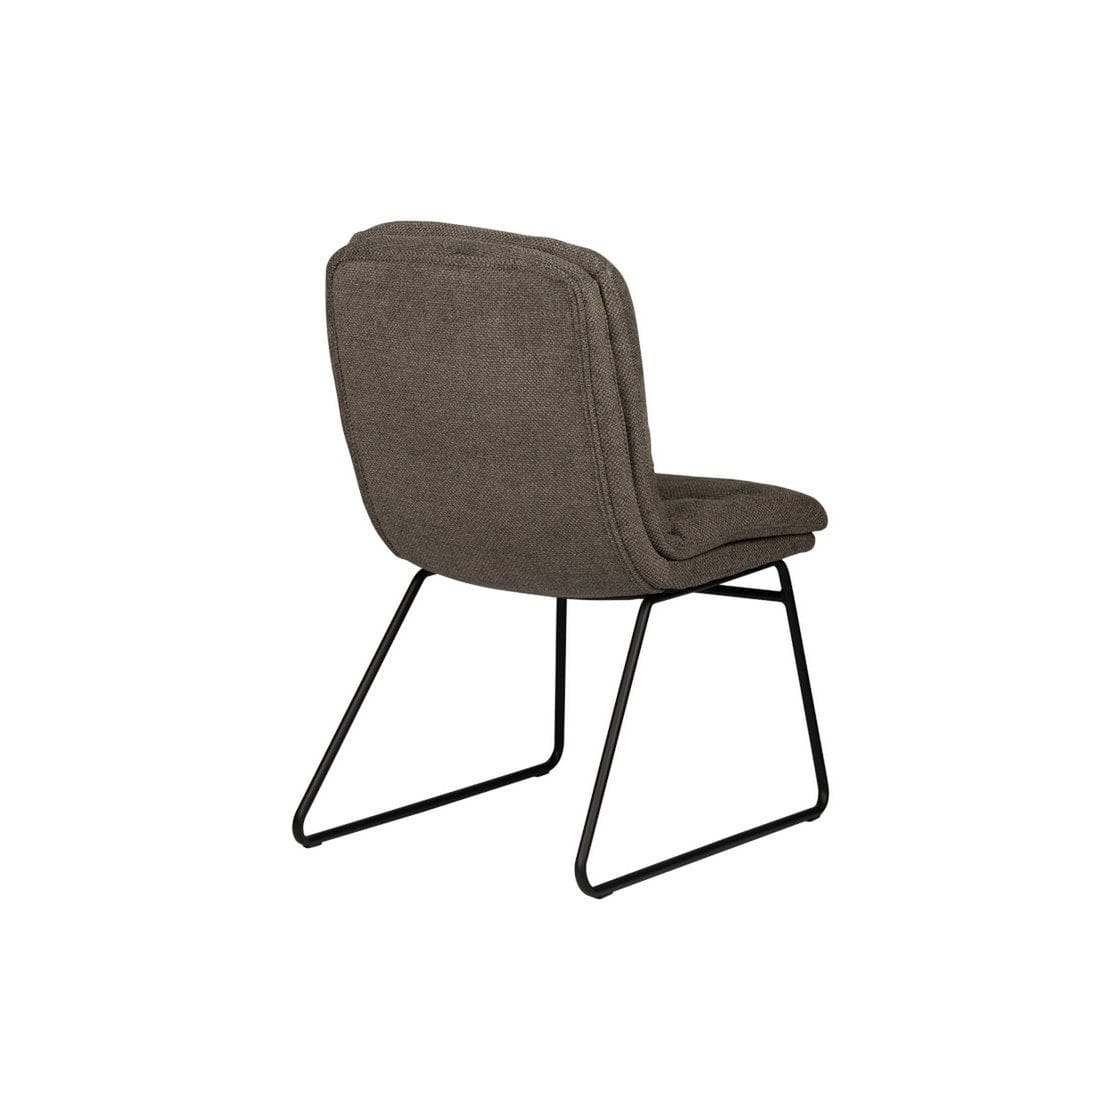 Pole To Pole Beluga chair Taupe (Set of 2)